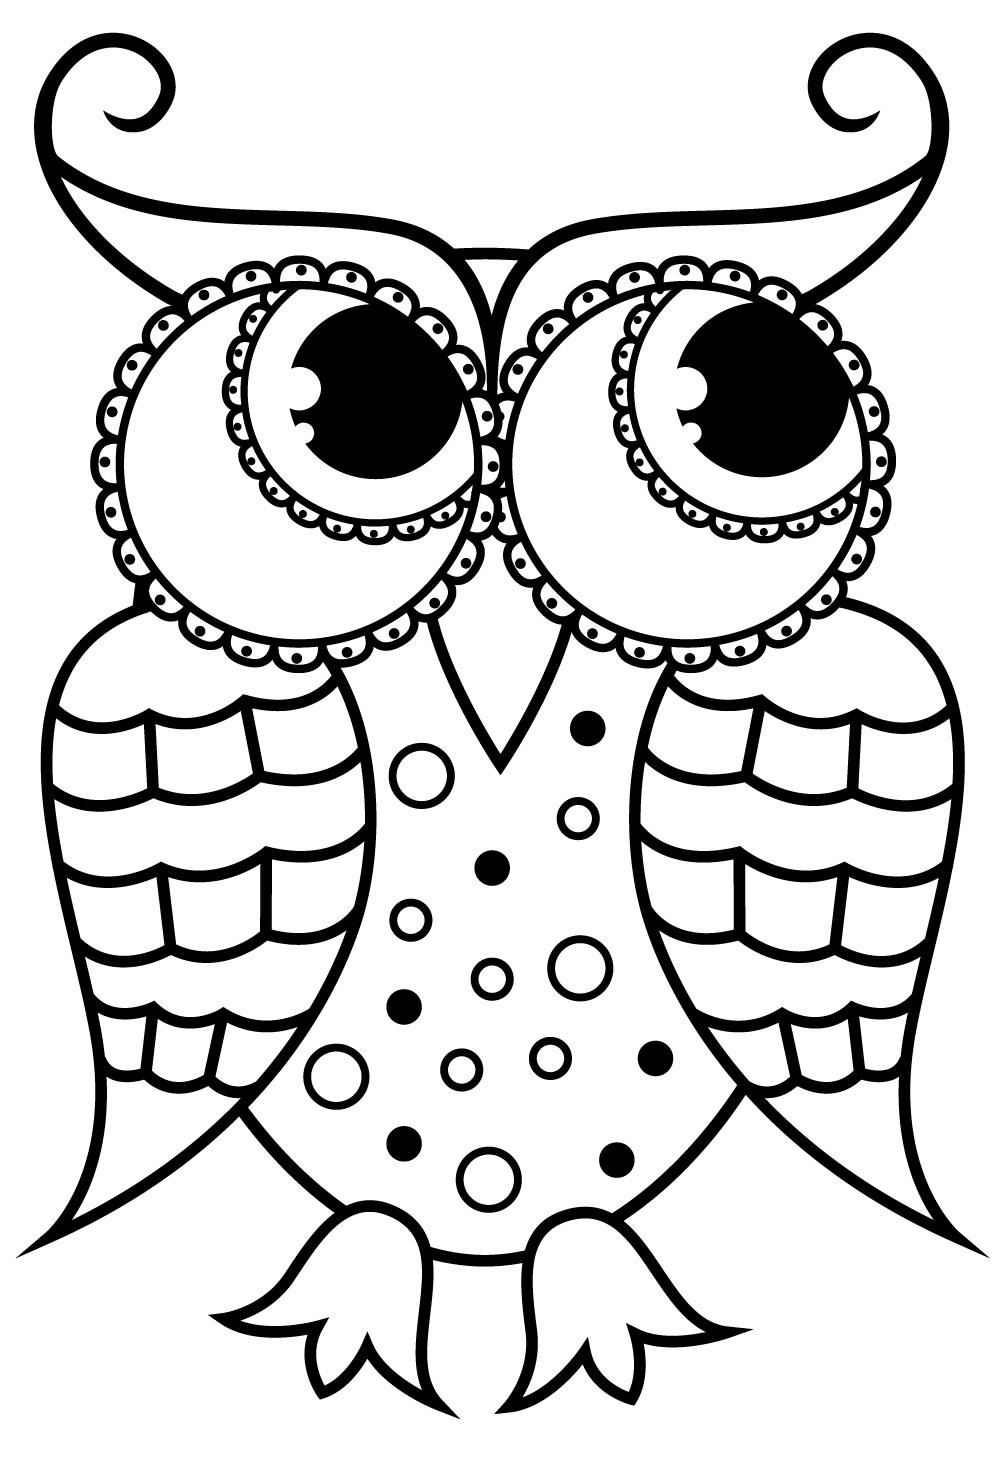 Large print owls pdf coloring book for beginners seniors or visually â rachel mintz coloring books